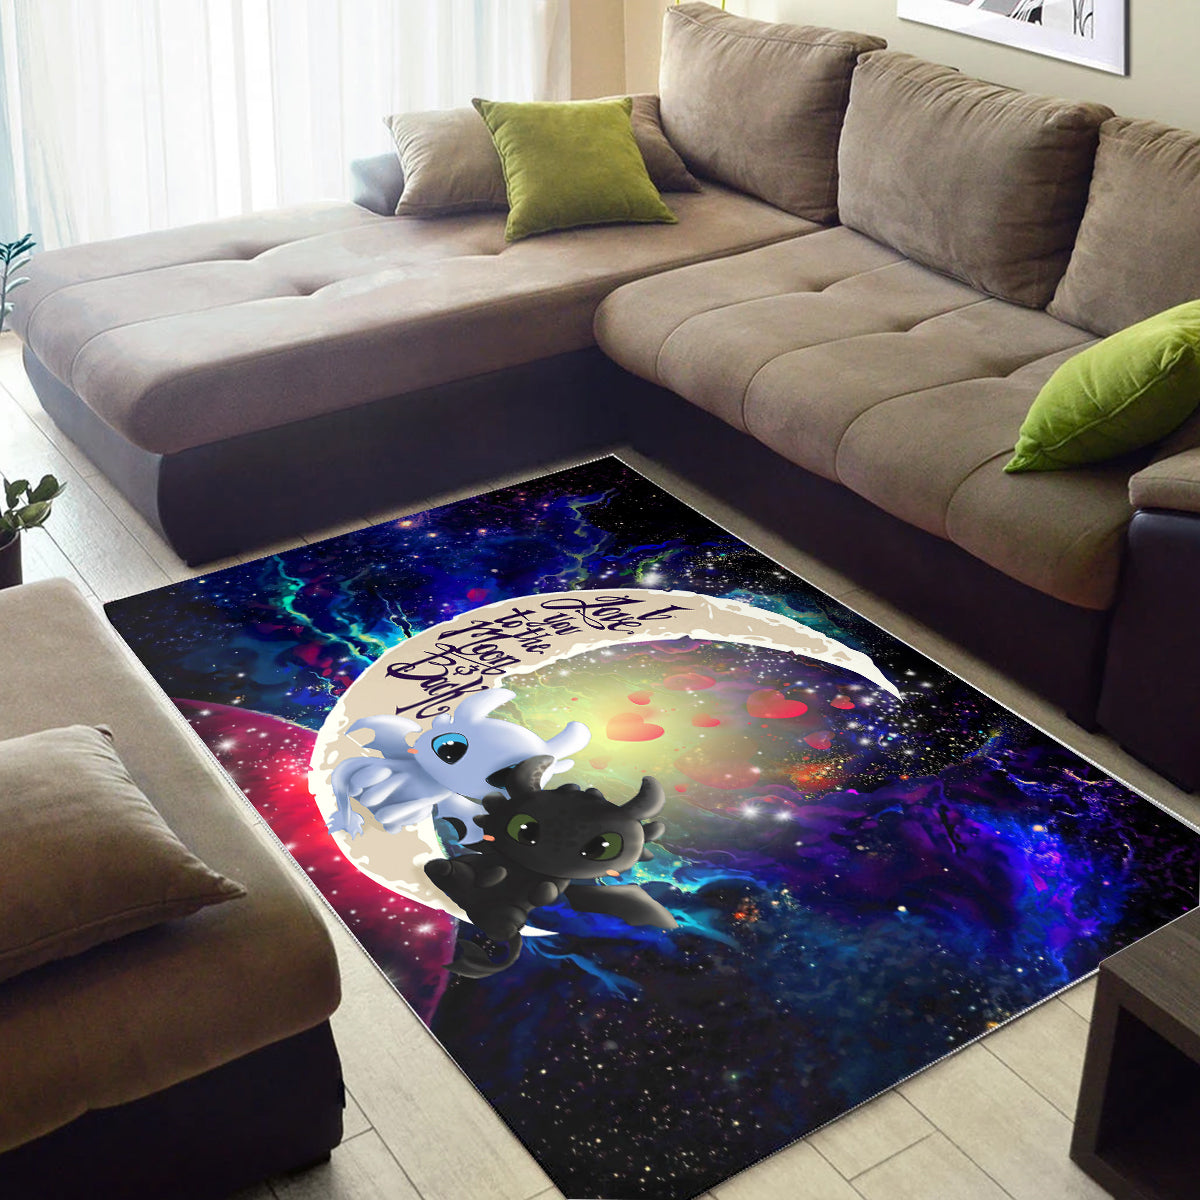 Toothless Light Fury Night Fury Love You To The Moon Galaxy Carpet Rug Home Room Decor